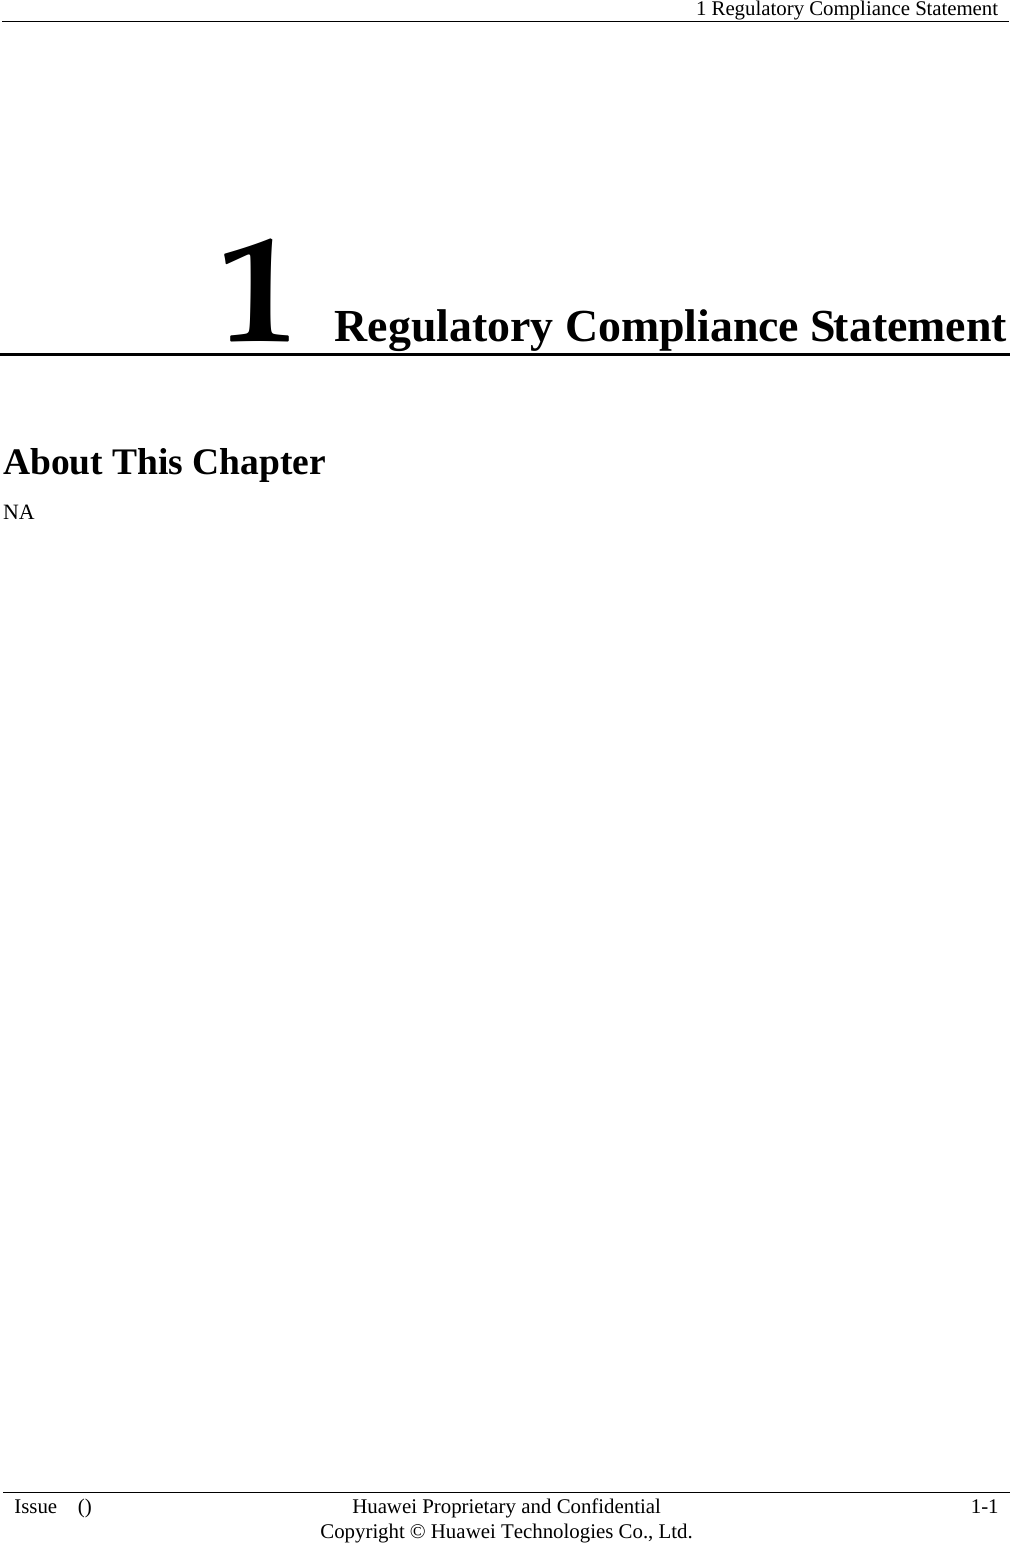   1 Regulatory Compliance Statement Issue  ()  Huawei Proprietary and Confidential     Copyright © Huawei Technologies Co., Ltd. 1-1 1 Regulatory Compliance Statement About This Chapter NA 